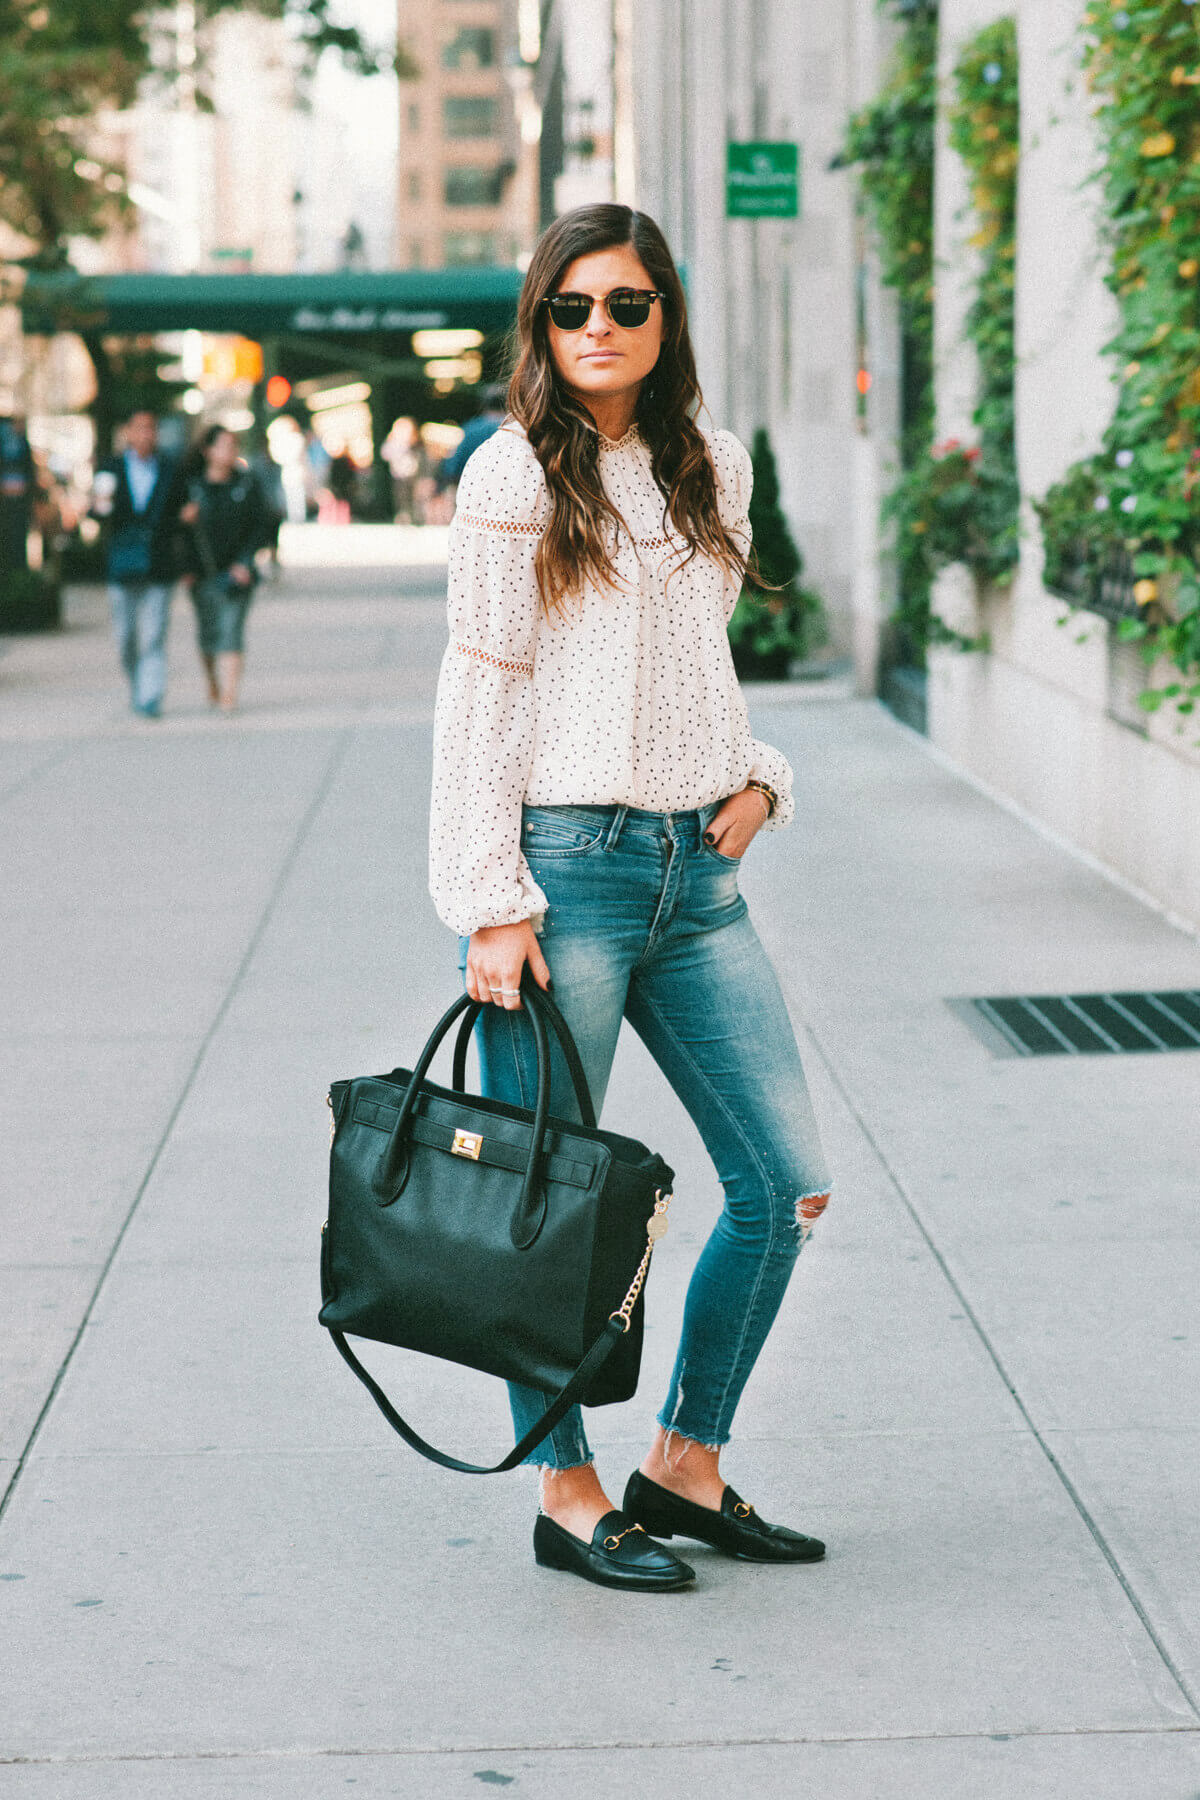 Fall Outfit Ideas, Polka Dot Blouse, Ripped Jeans, Gucci Loafers, Black Tote Bag, Tilden of To Be Bright